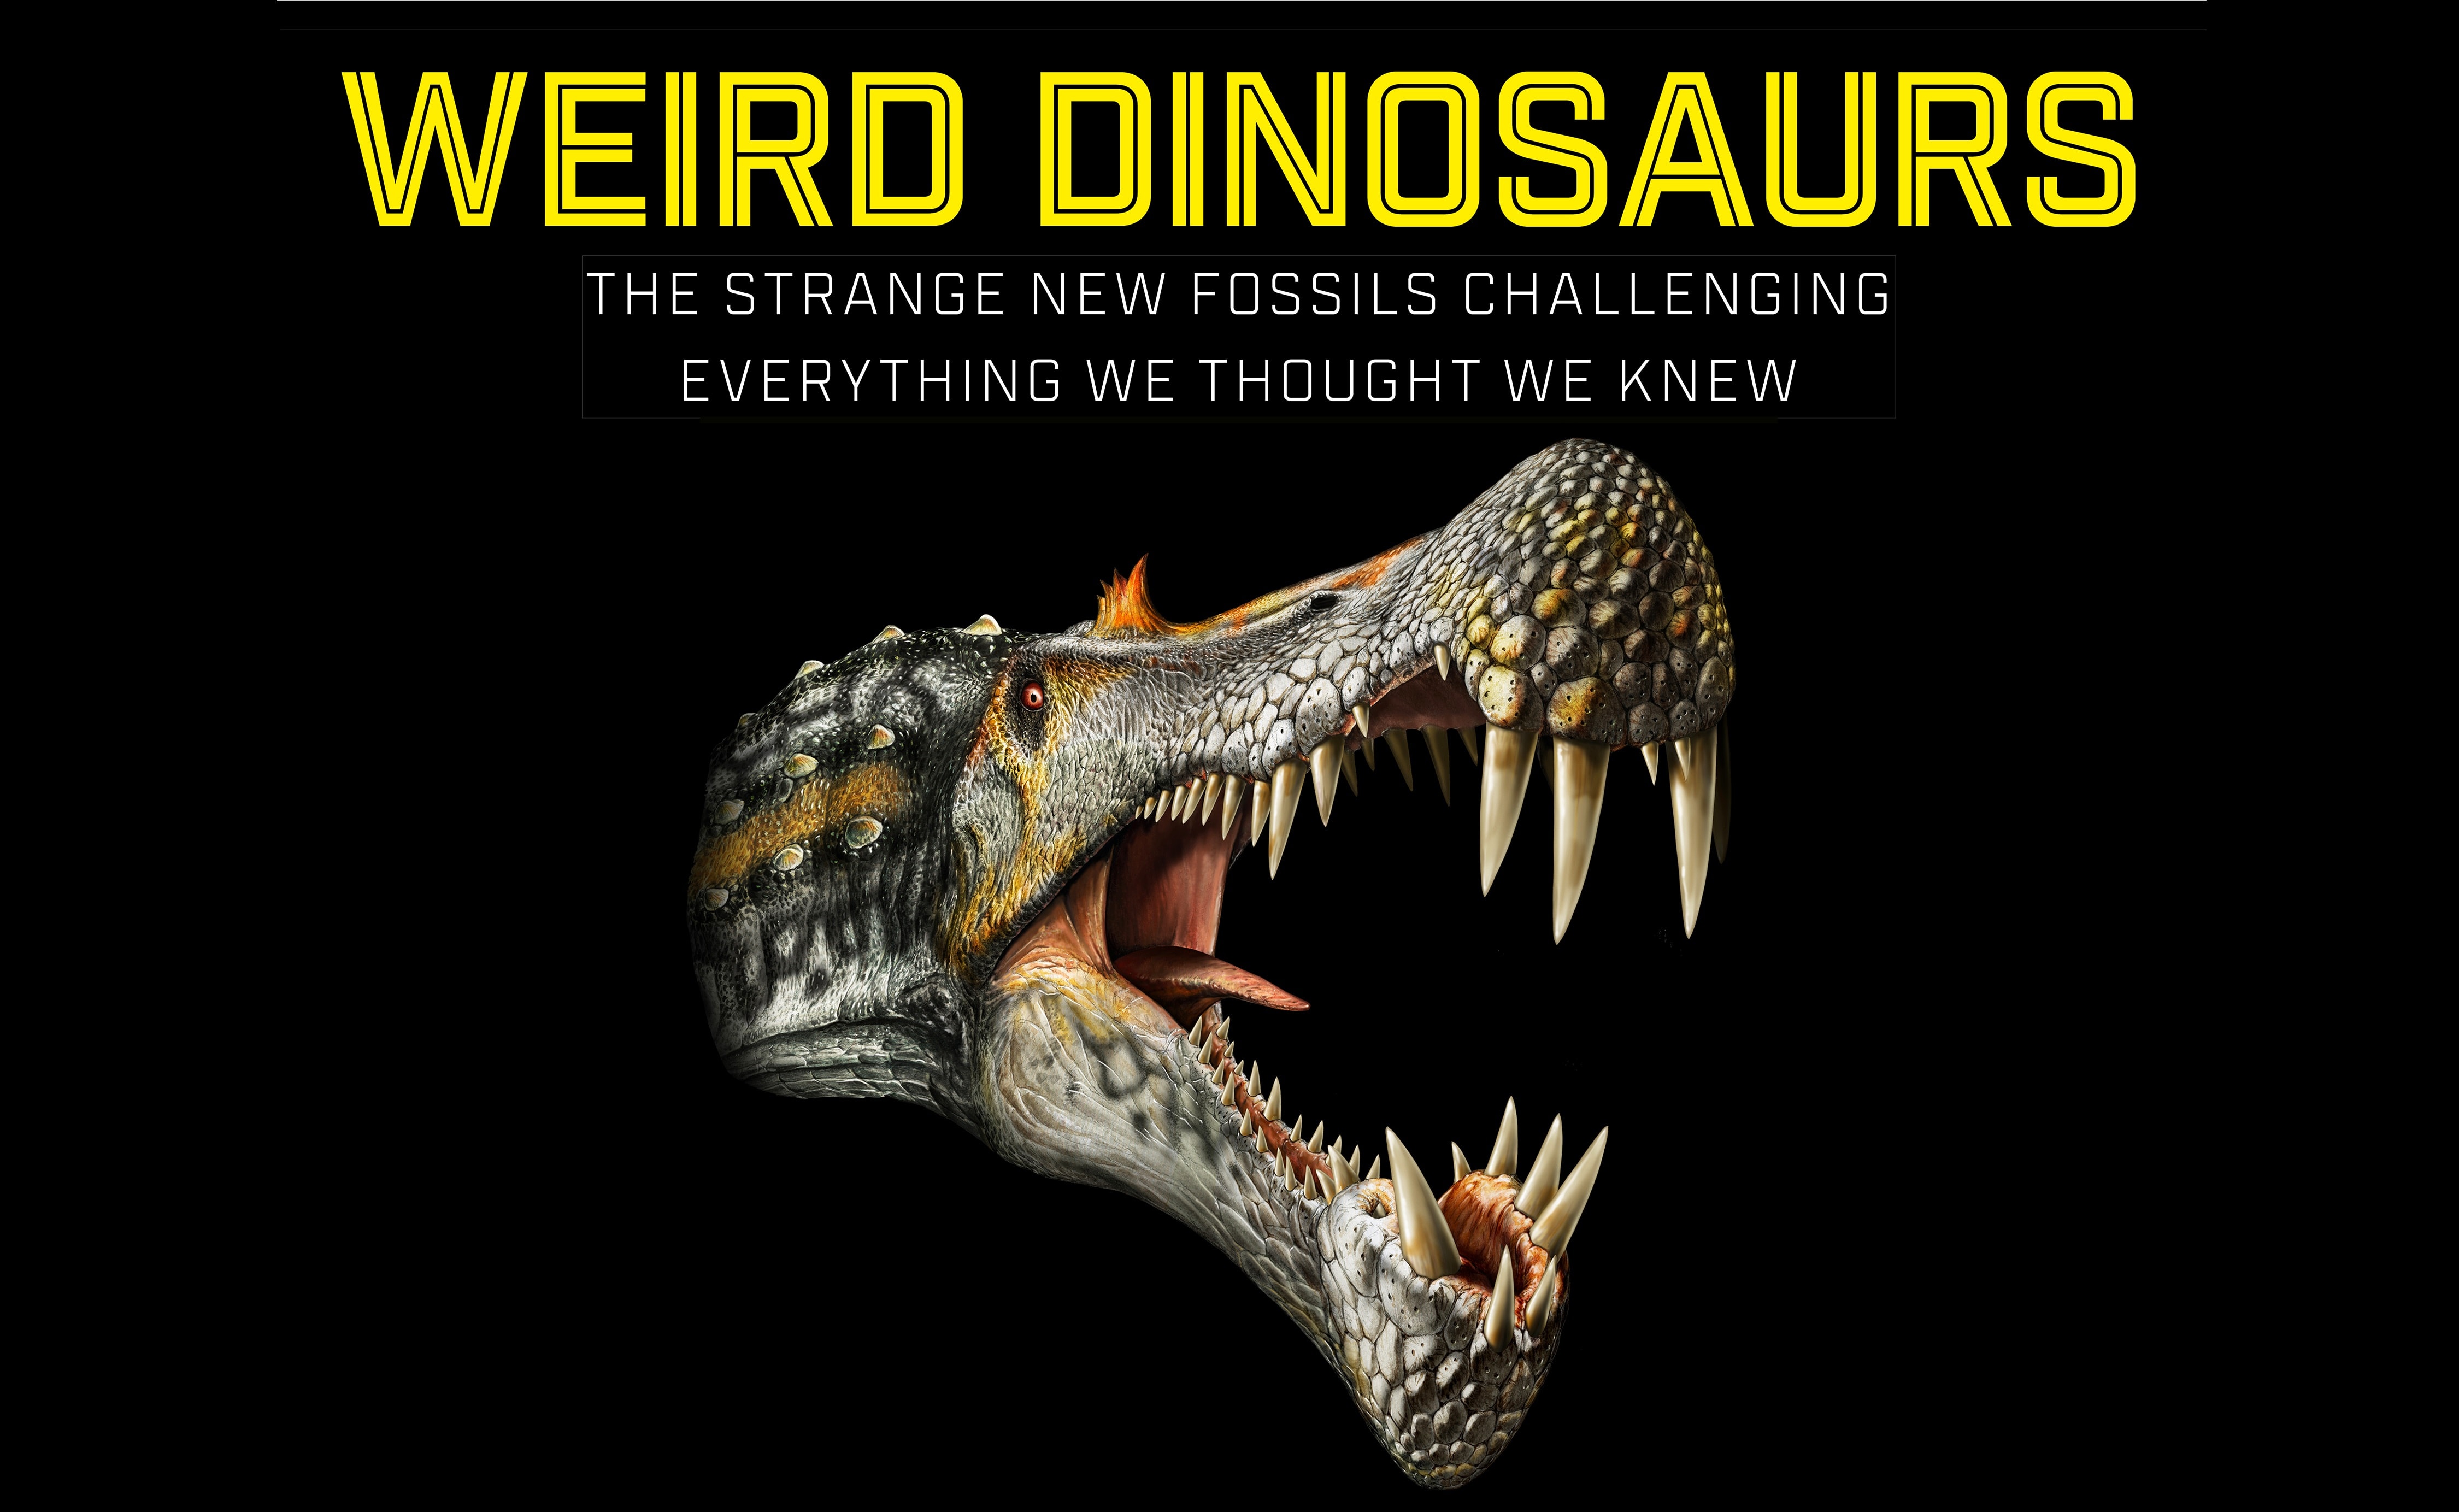 Weird Dinosaurs The Strange New Fossils Challenging Everything We Thought We Knew